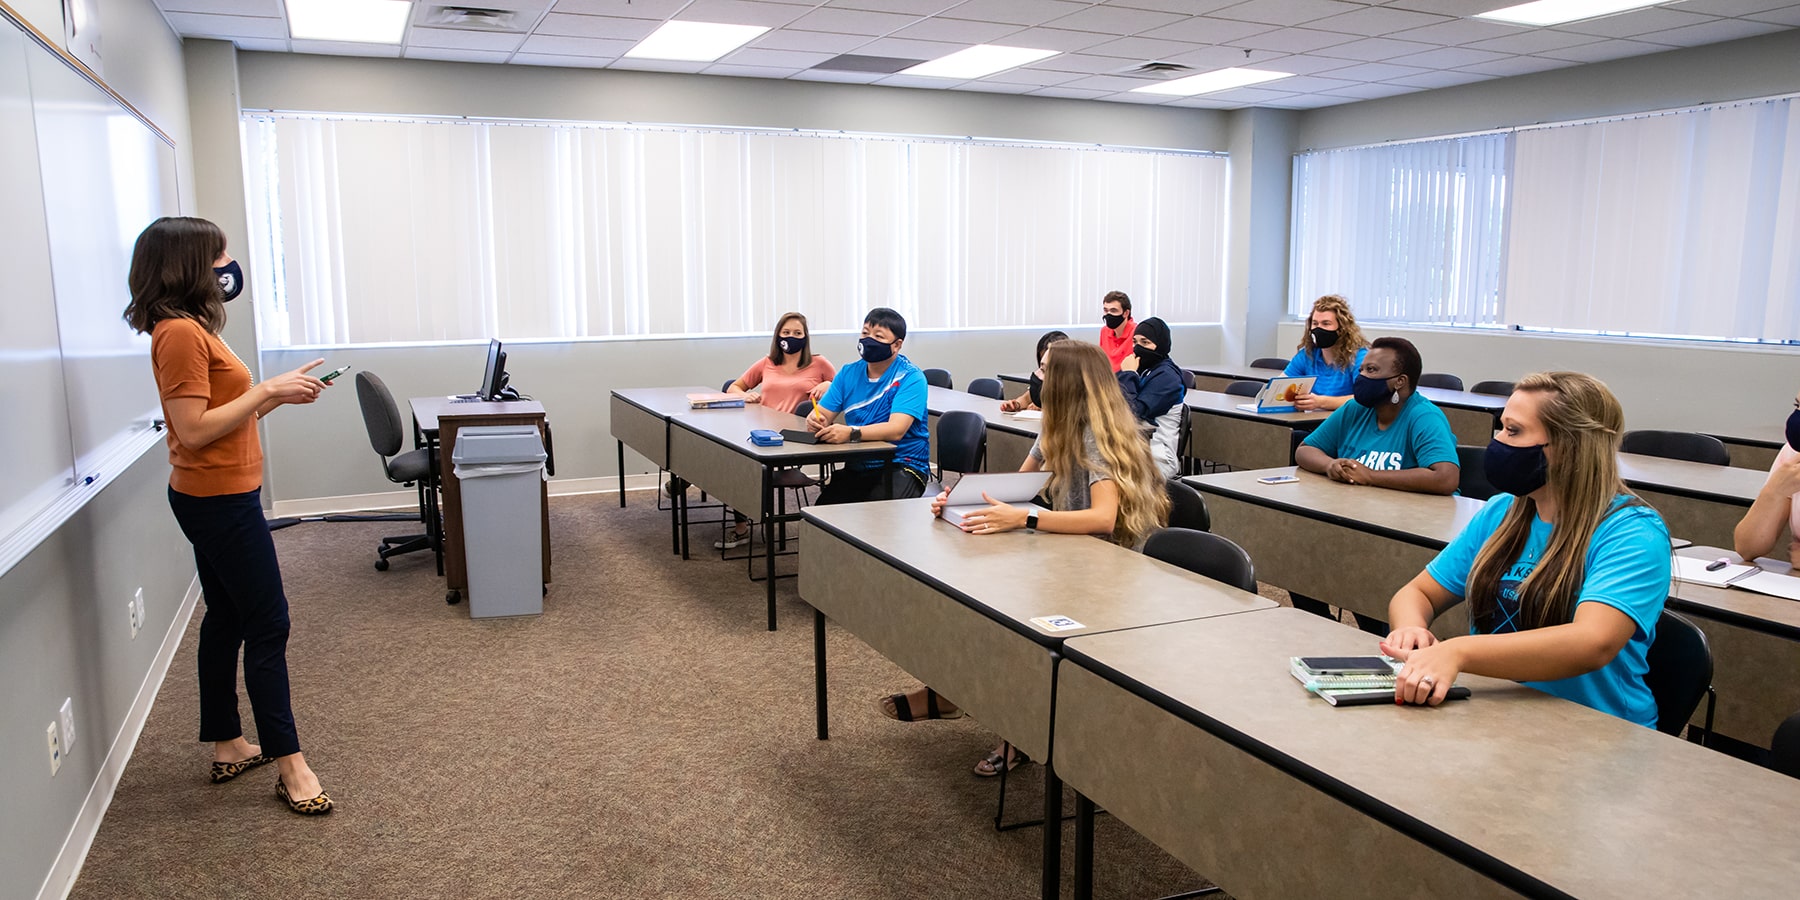 OTC students and instructor in classroom